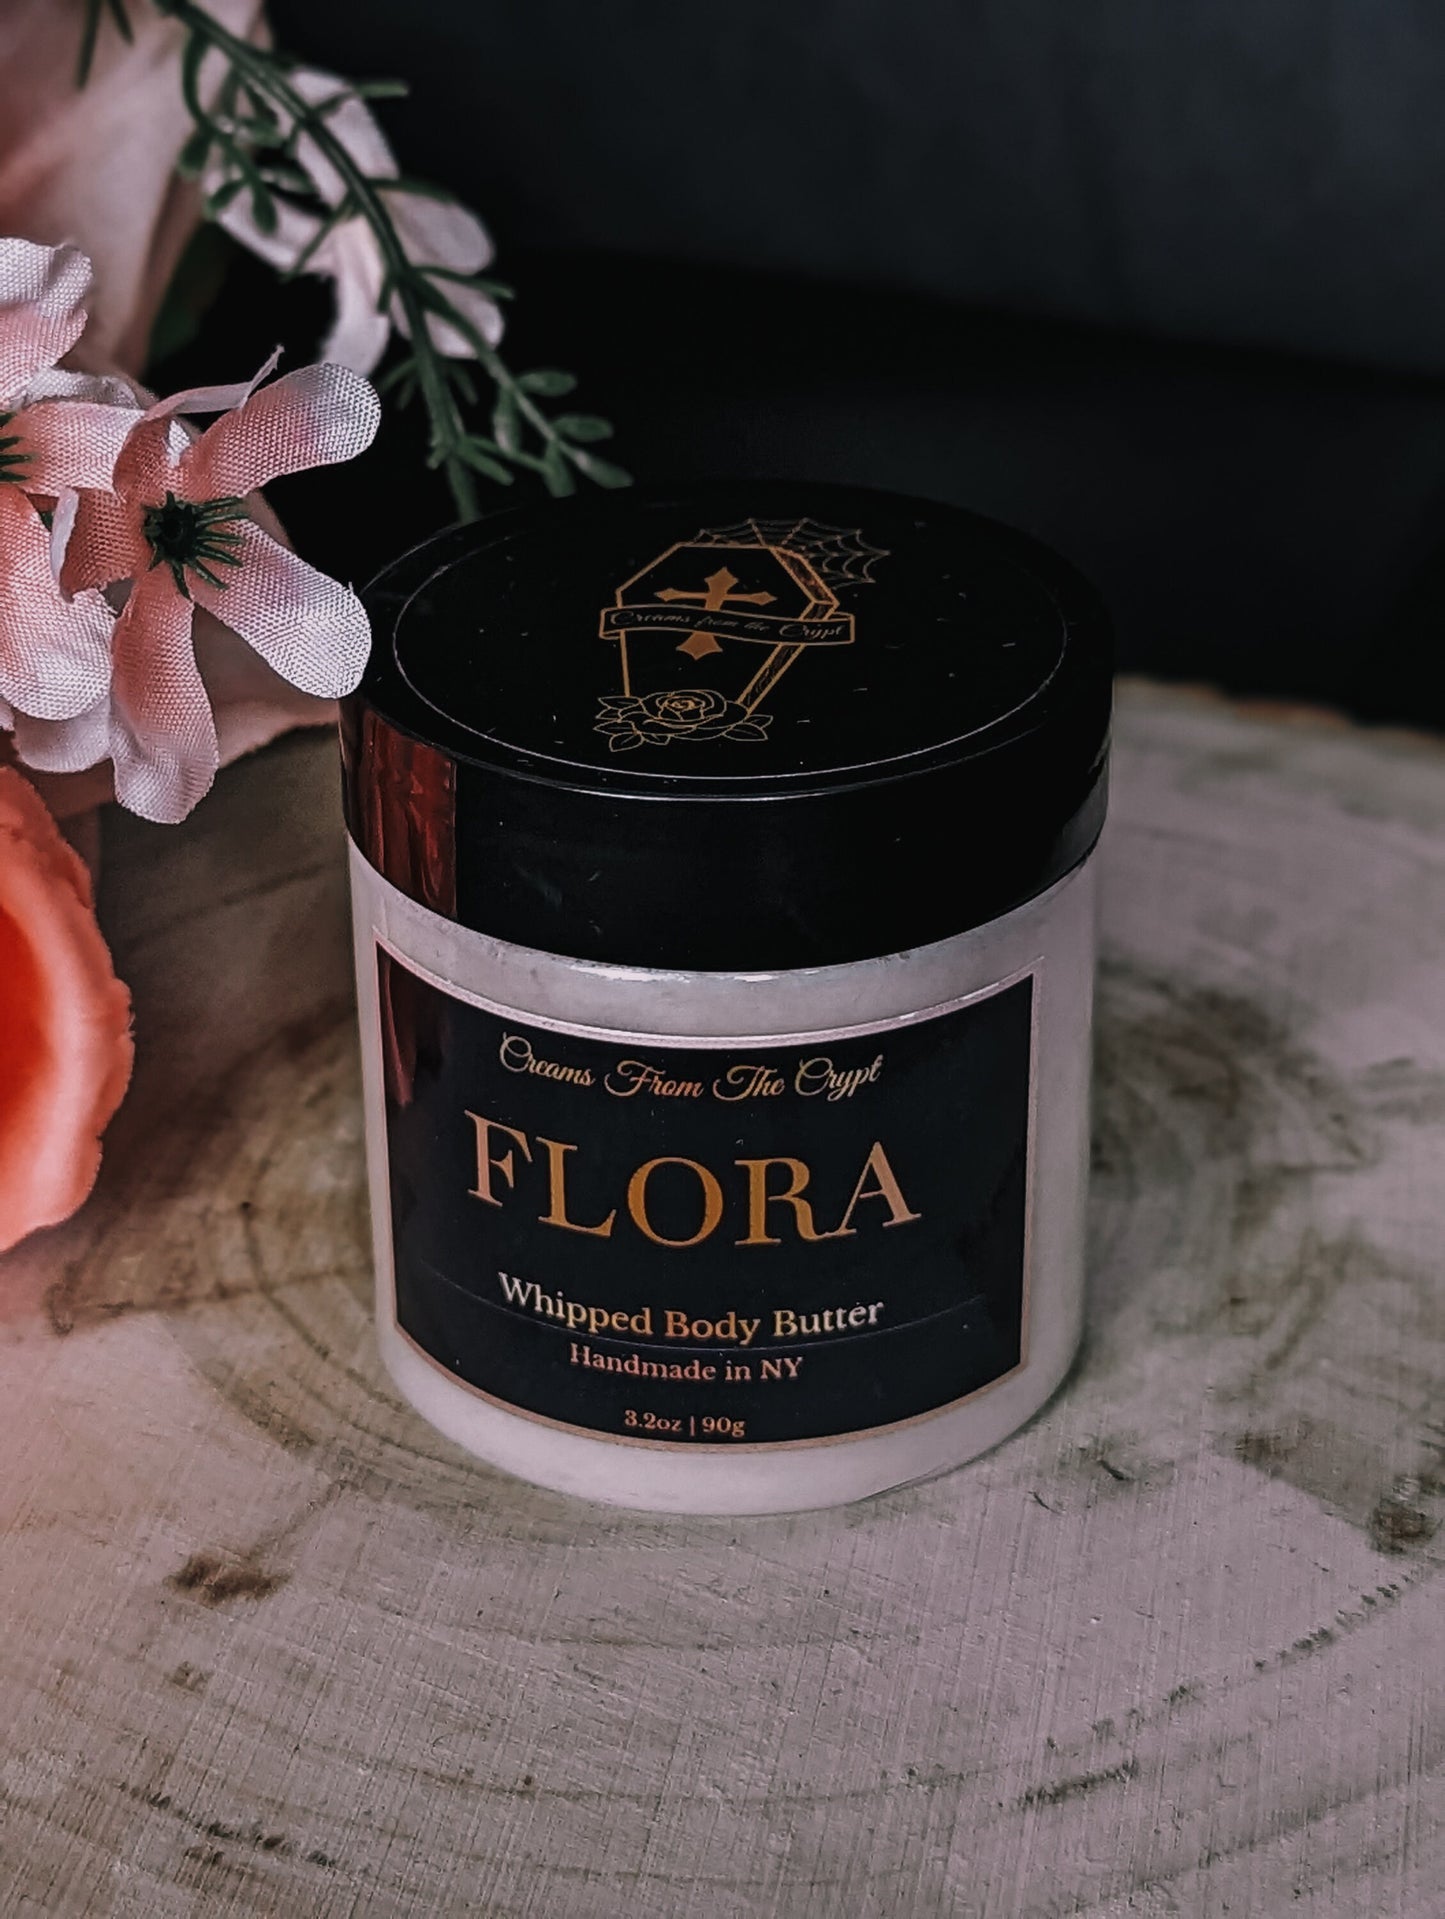 FLORA - Violet and rose scented, vegan whipped body butter, Shea, mango butter, moisturizer, gothic skincare, floral fragrance, spring